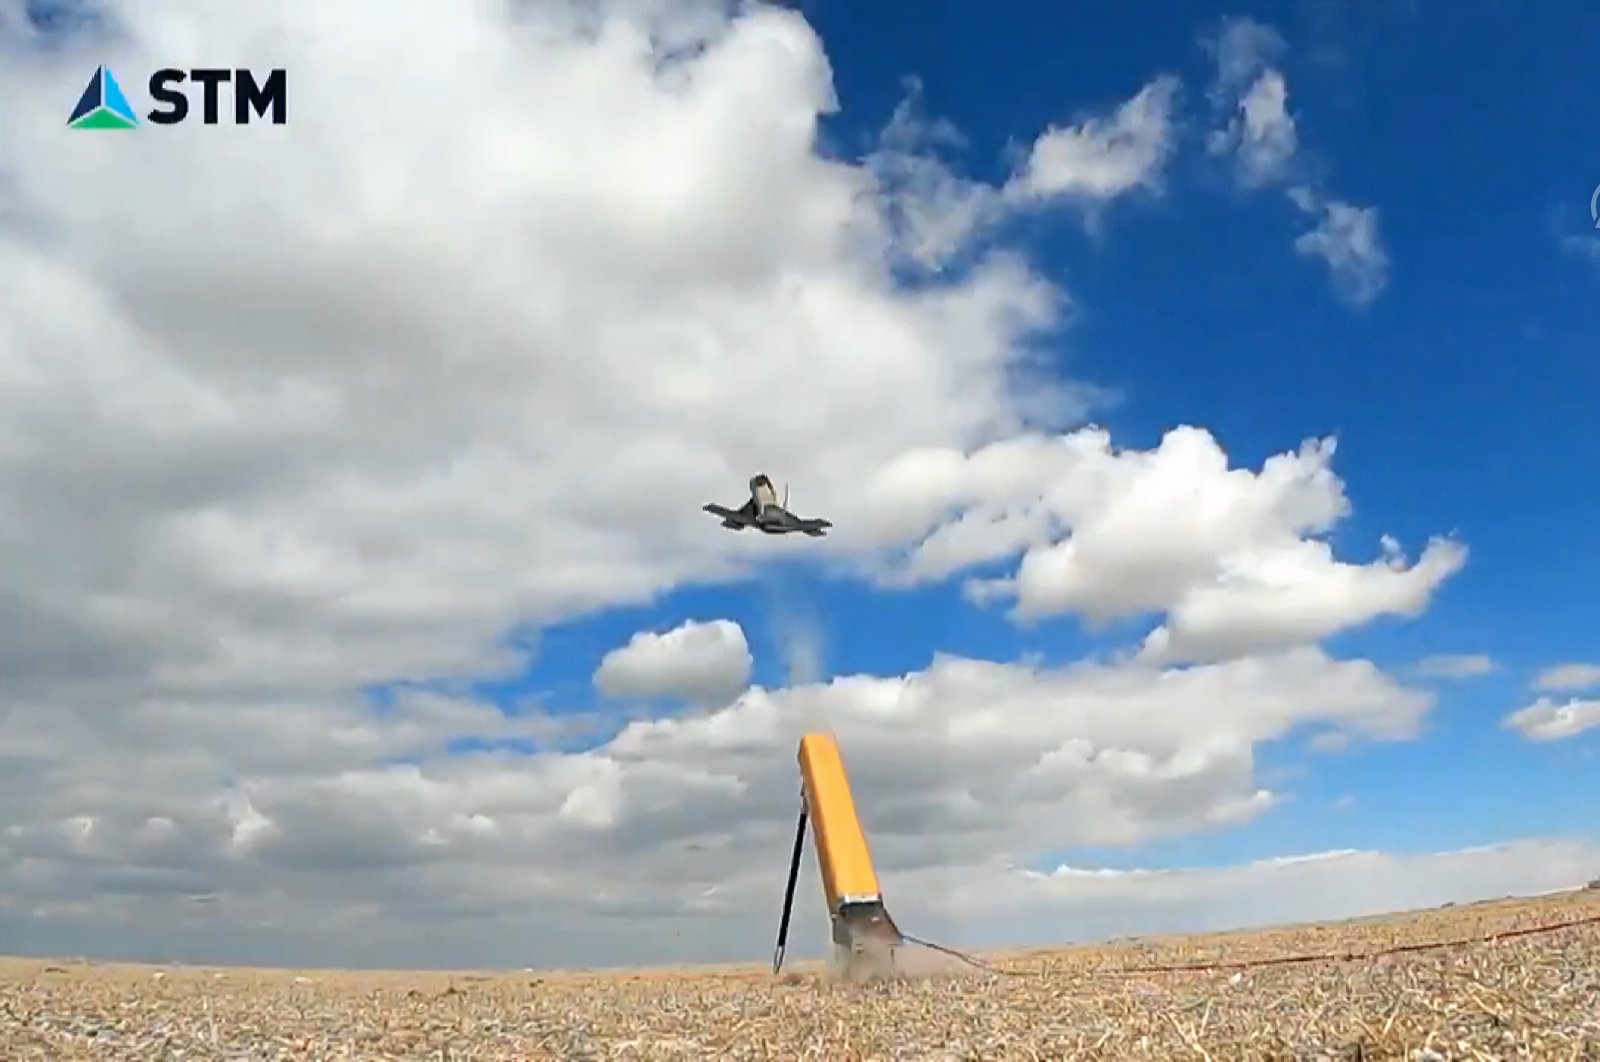 A screengrab from the test firing of the Alpagu shows the drone's launch.